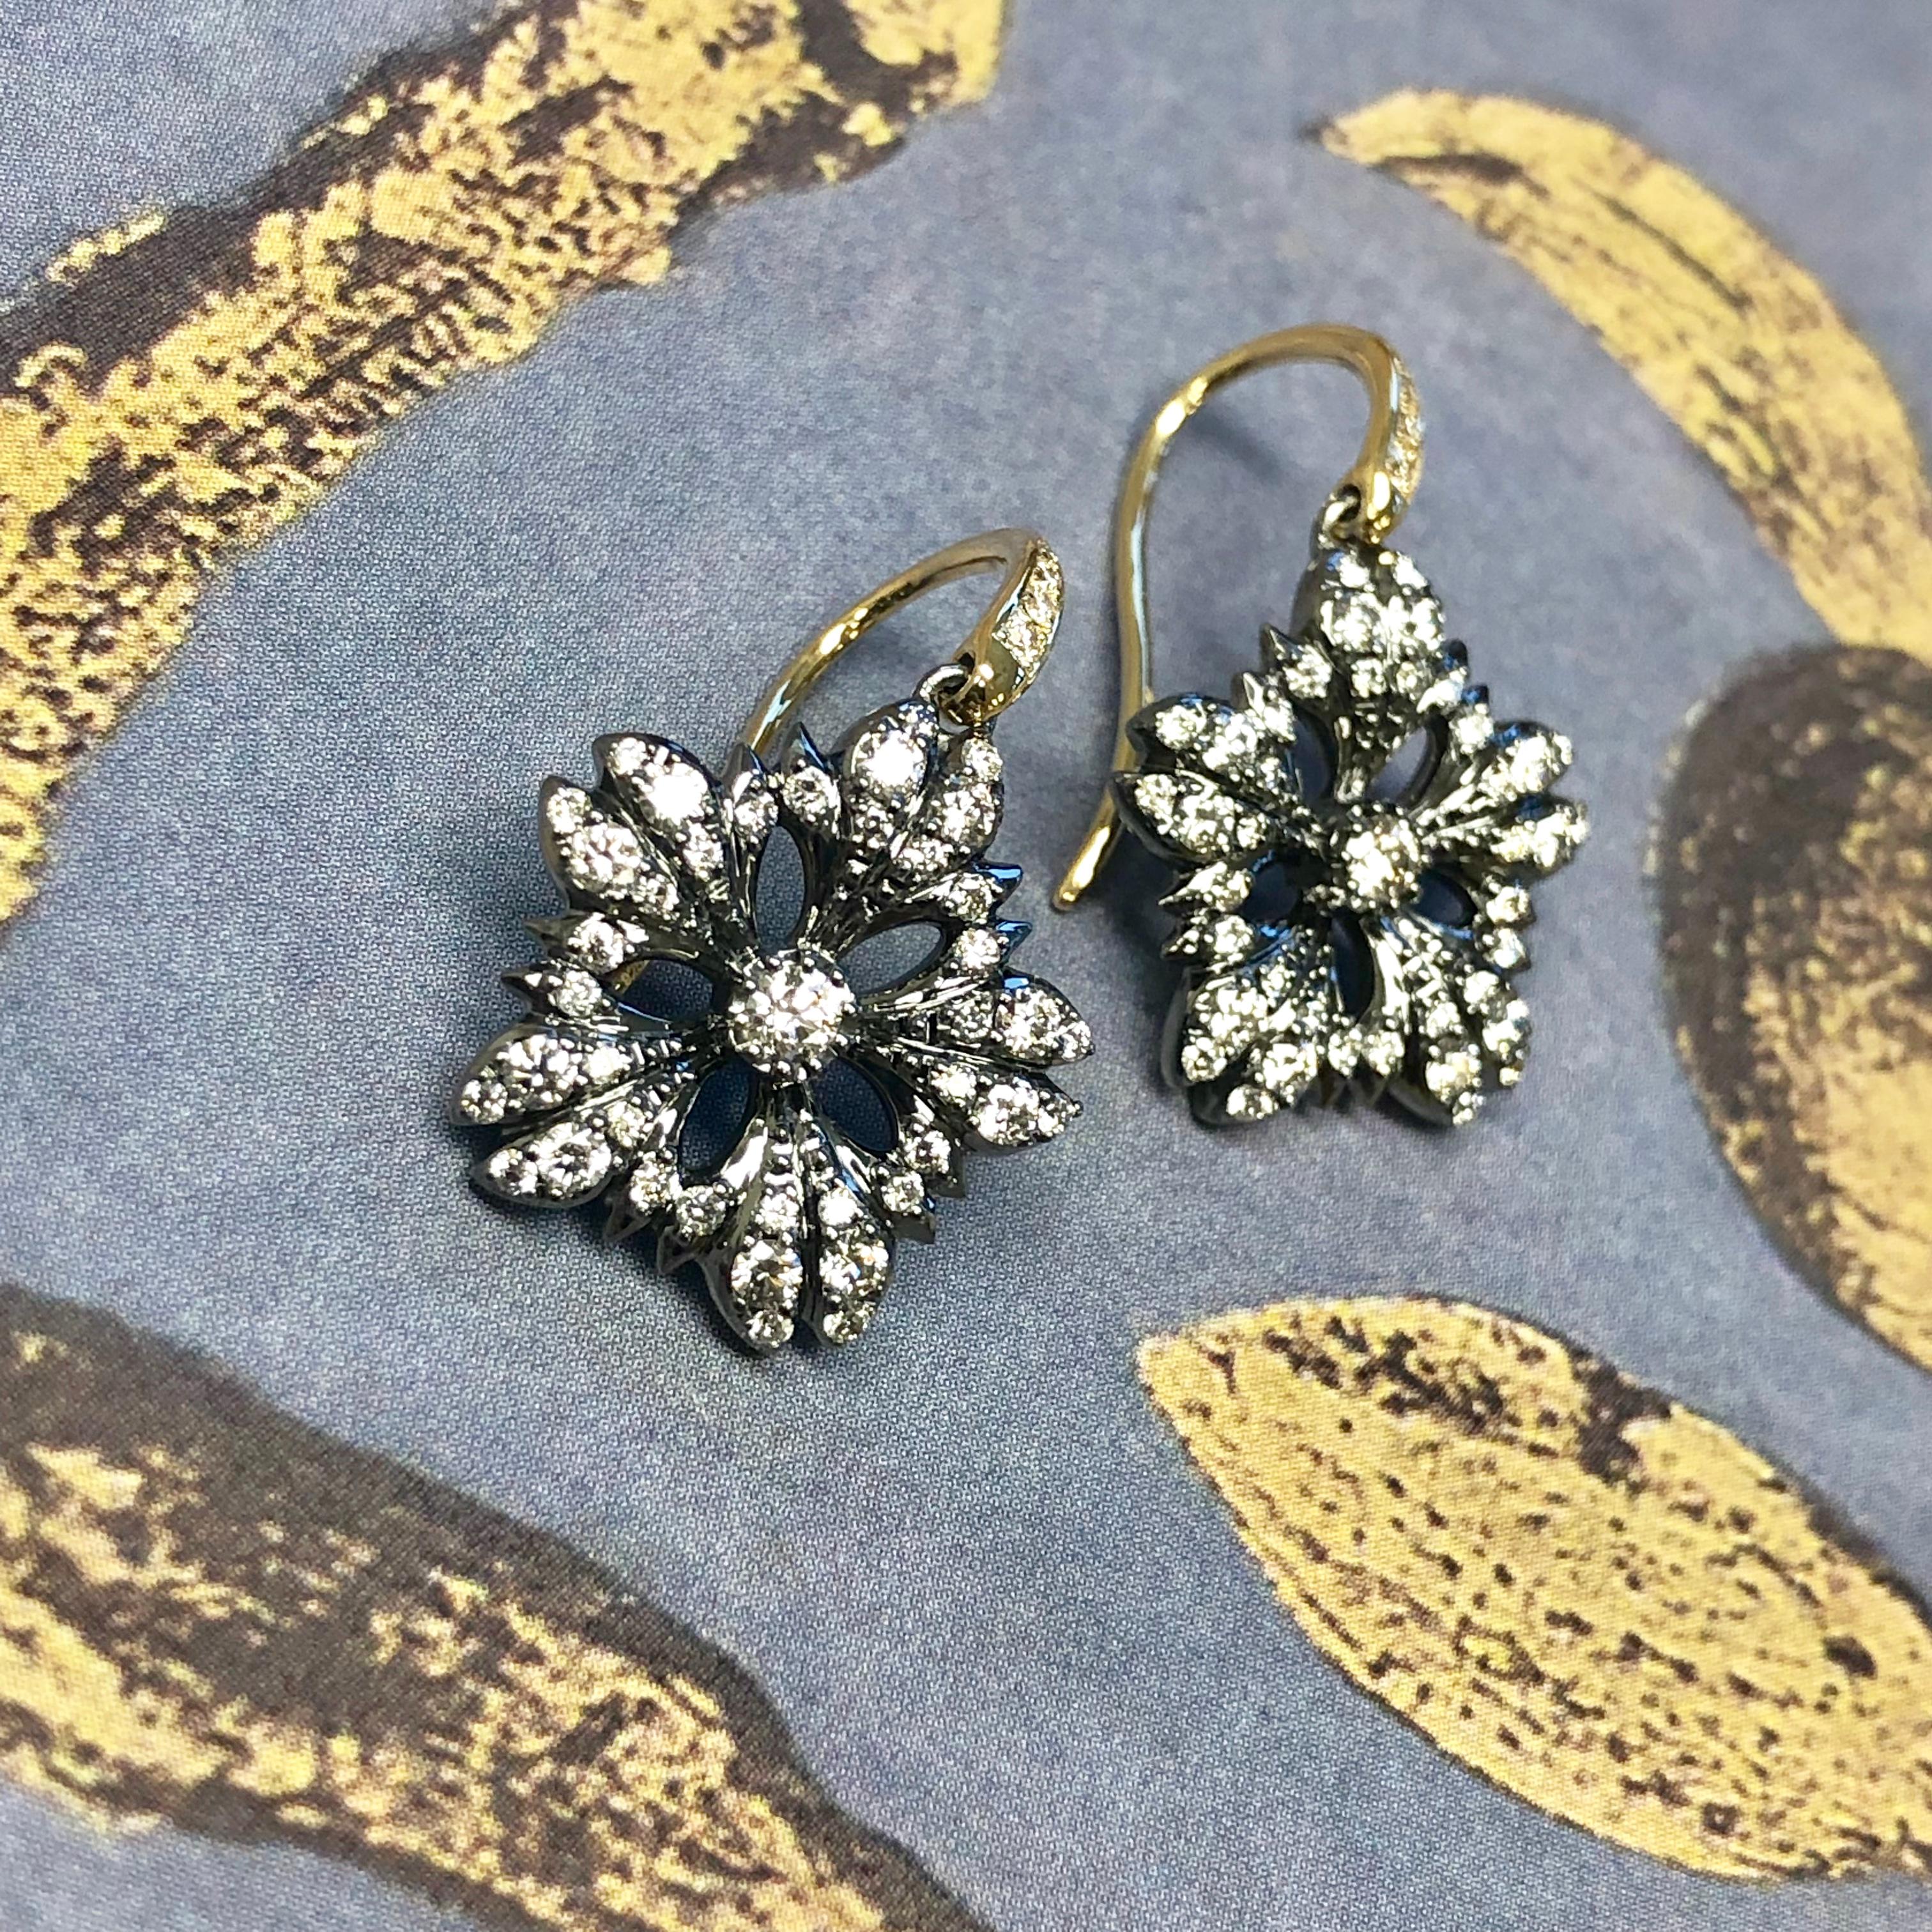 Created in oxidized silver with 18 karat yellow gold accents
Bright diamonds 0.80 ct approx
Limited edition

These Flower Earrings with Diamonds are crafted with a delectable blend of oxidized silver and 18 karat yellow gold accents, to give them an